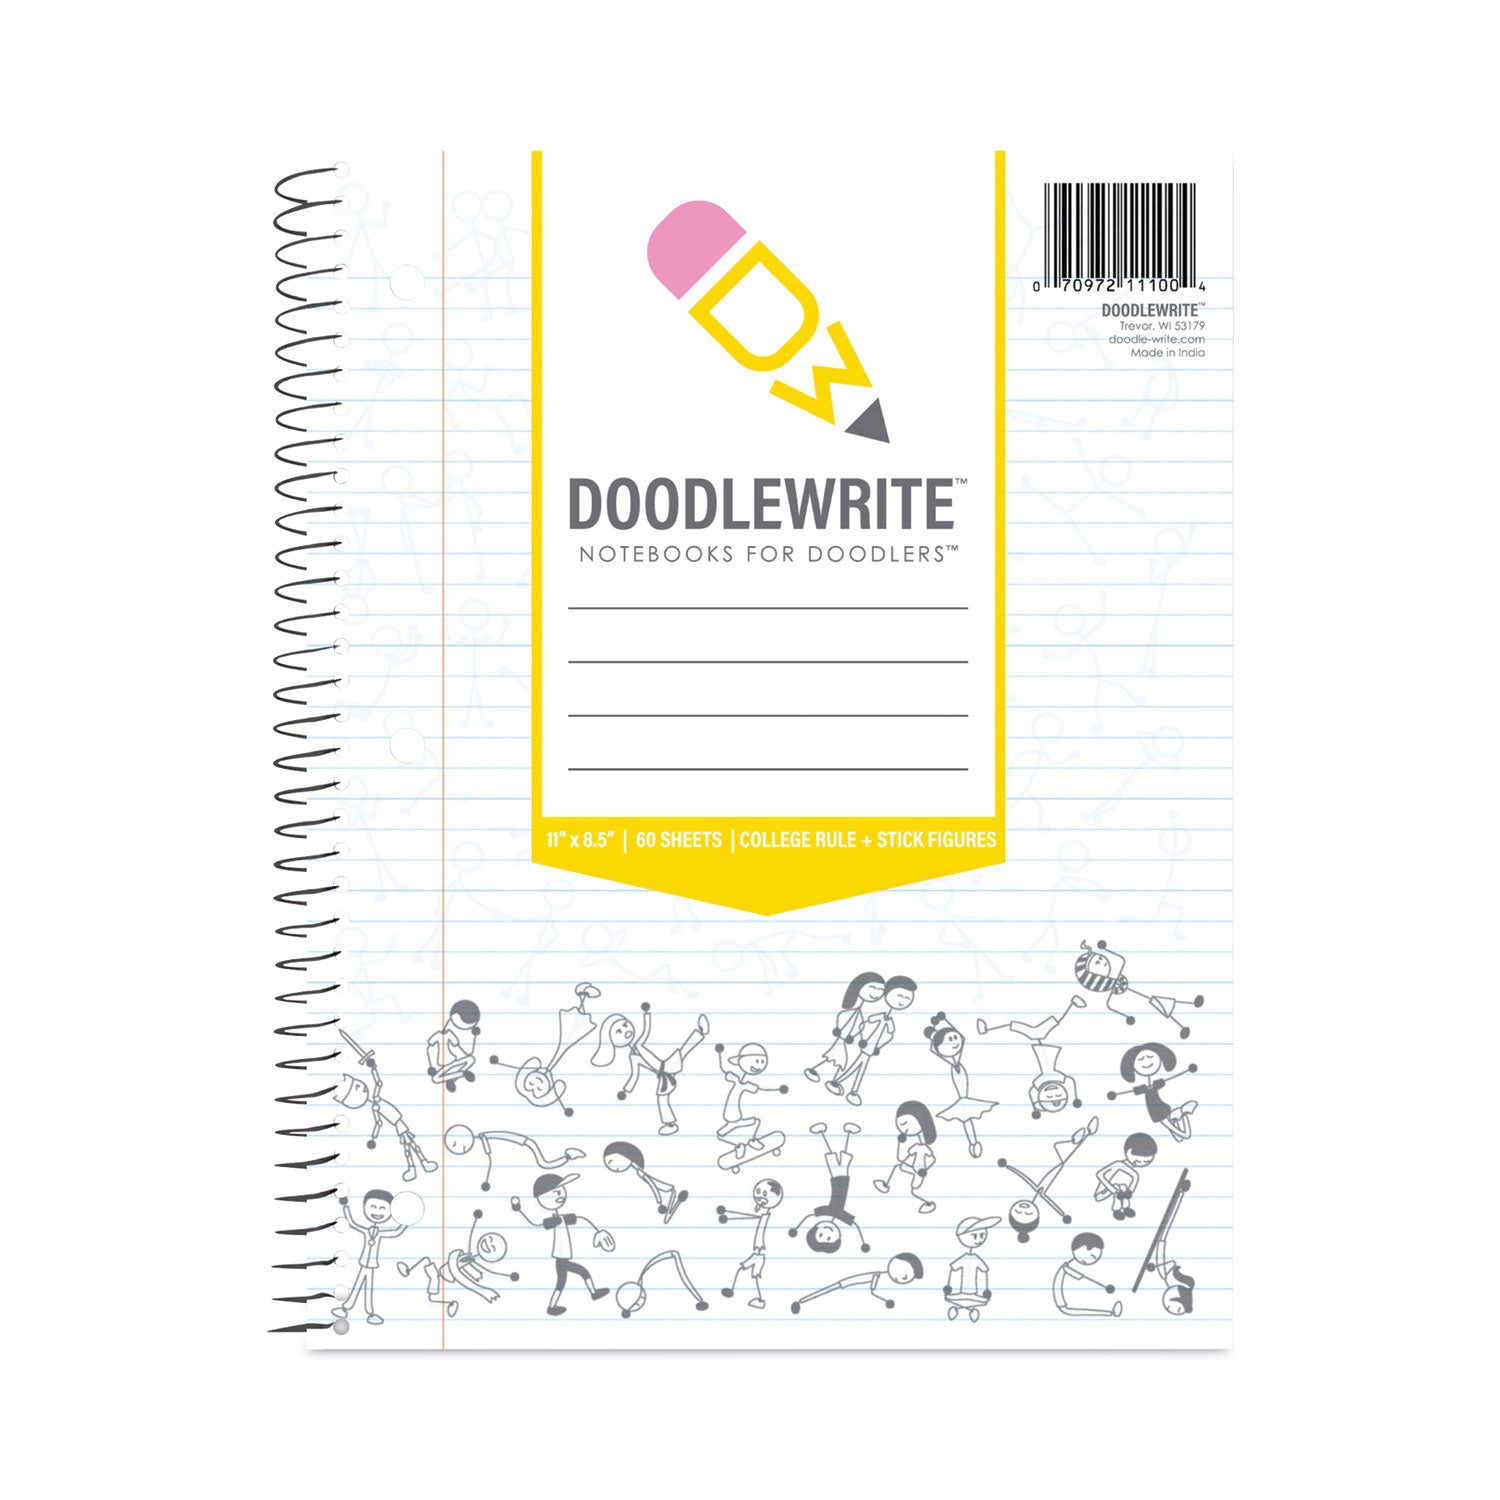 doodlewrite-notebooks-1-subject-medium-college-rule-white-cover-60-sheets-24-carton-ships-in-4-6-business-days_roa11100cs - 1